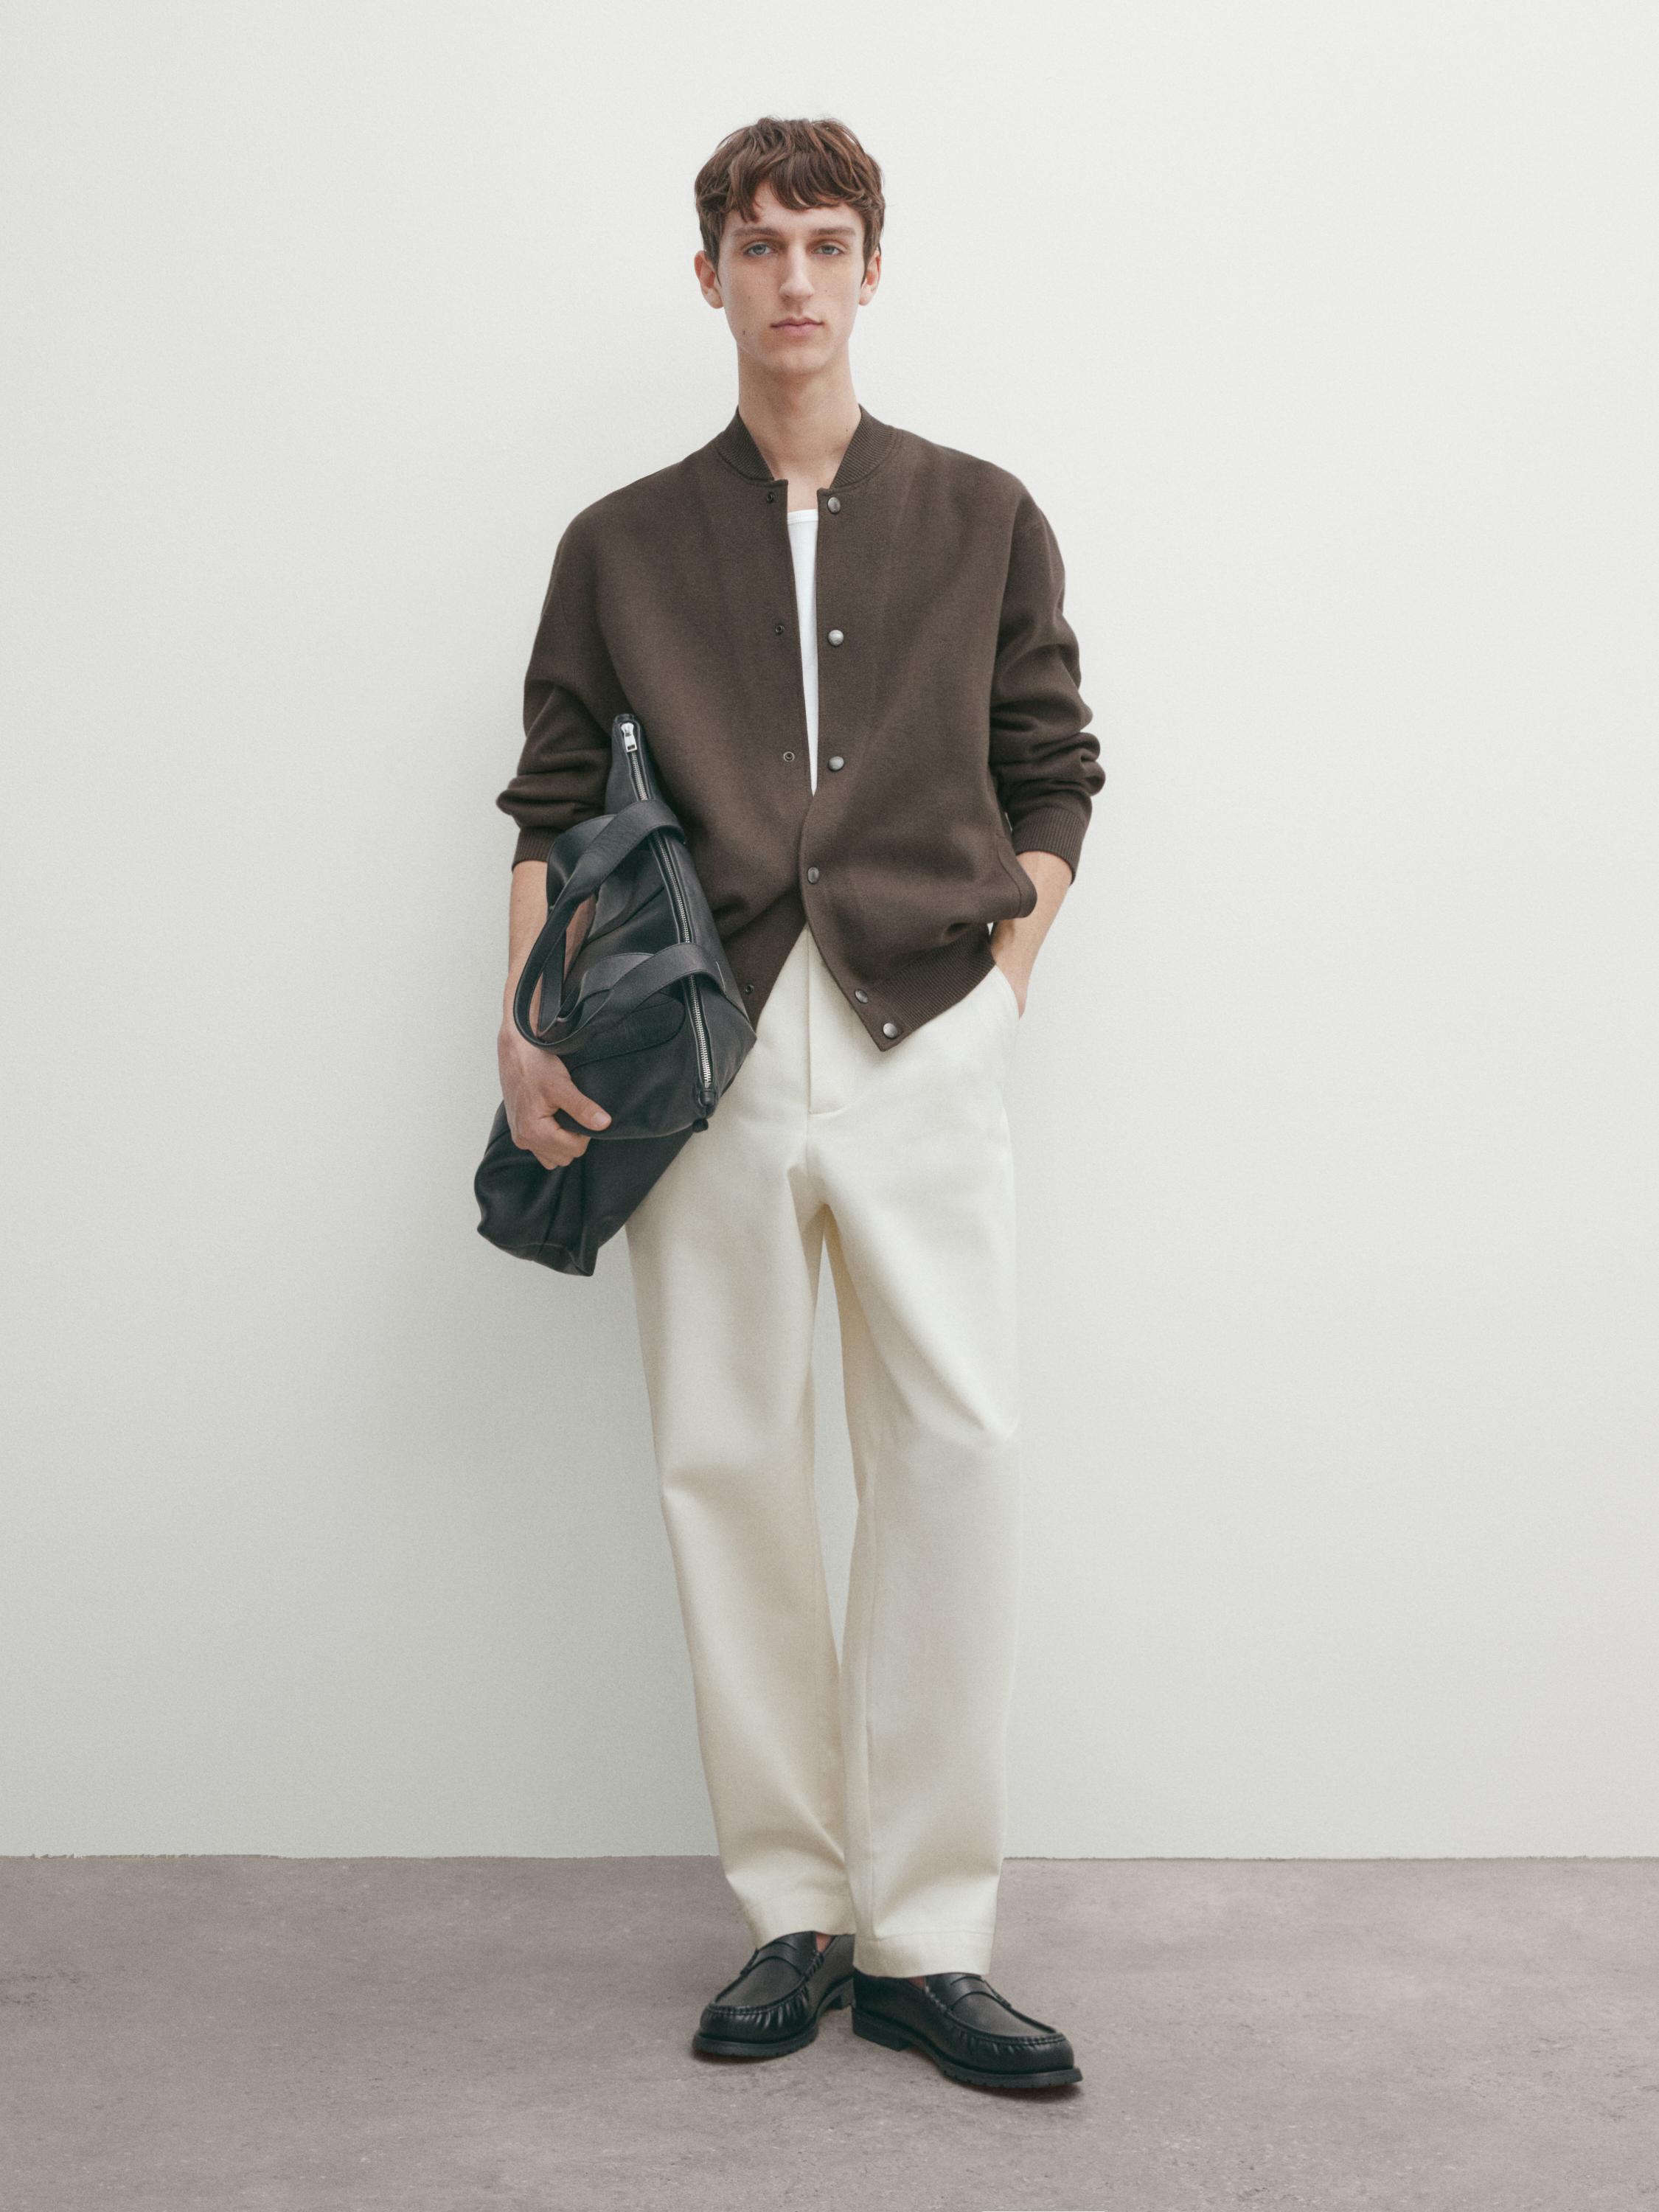 Knit bomber jacket with snap-buttons - Light tan | ZARA United States